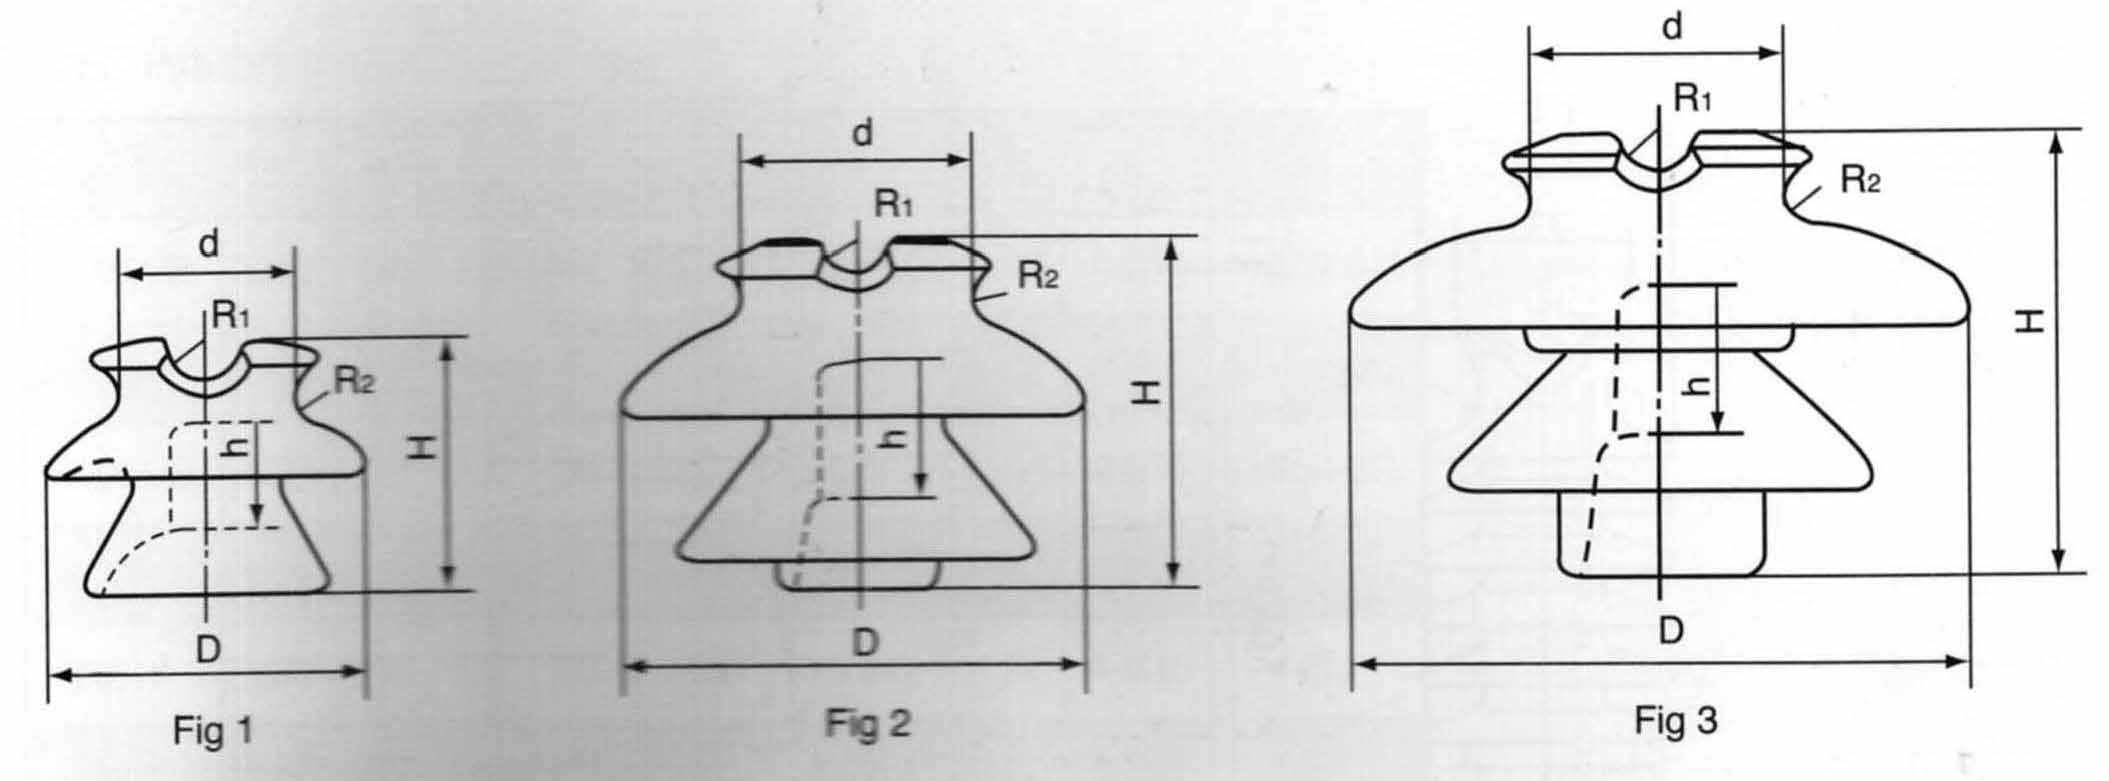 Pin Type Insulators for High Voltage AS 02图片1.png